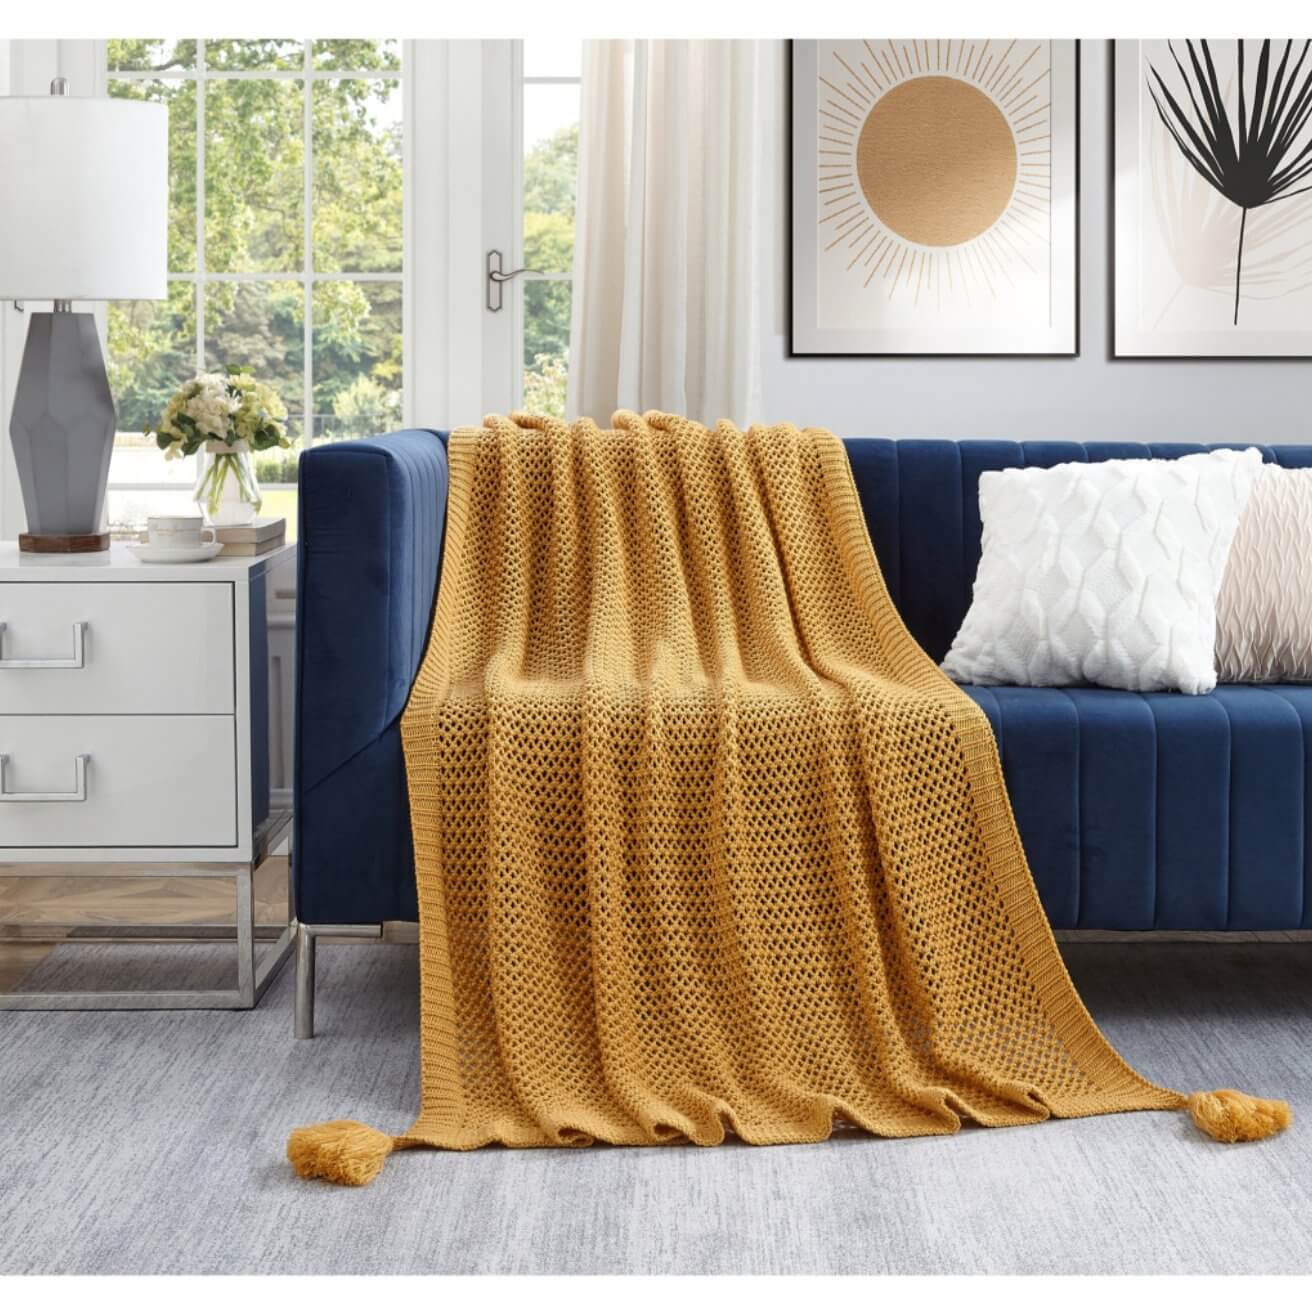 Knitted Acrylic Throw Blanket In Variety of Solid Colors